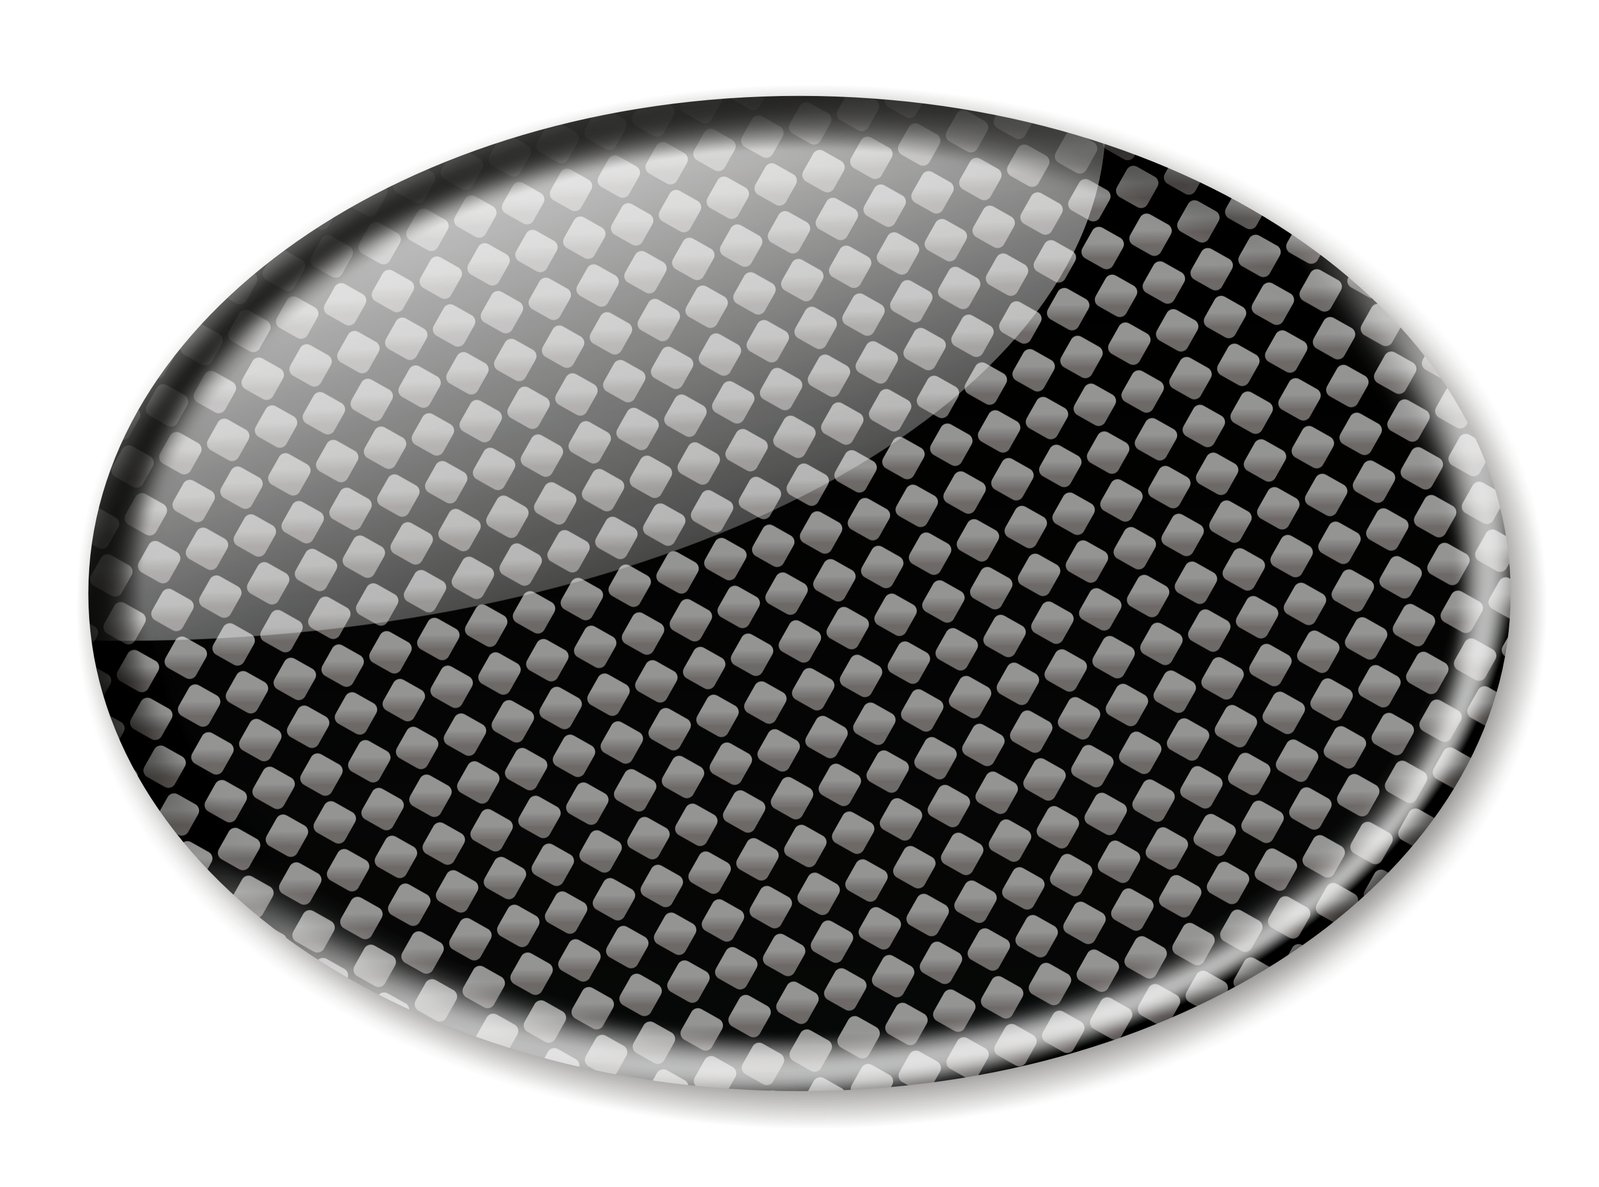 the dark gray circle of a checkerboard pattern is placed on top of a white surface